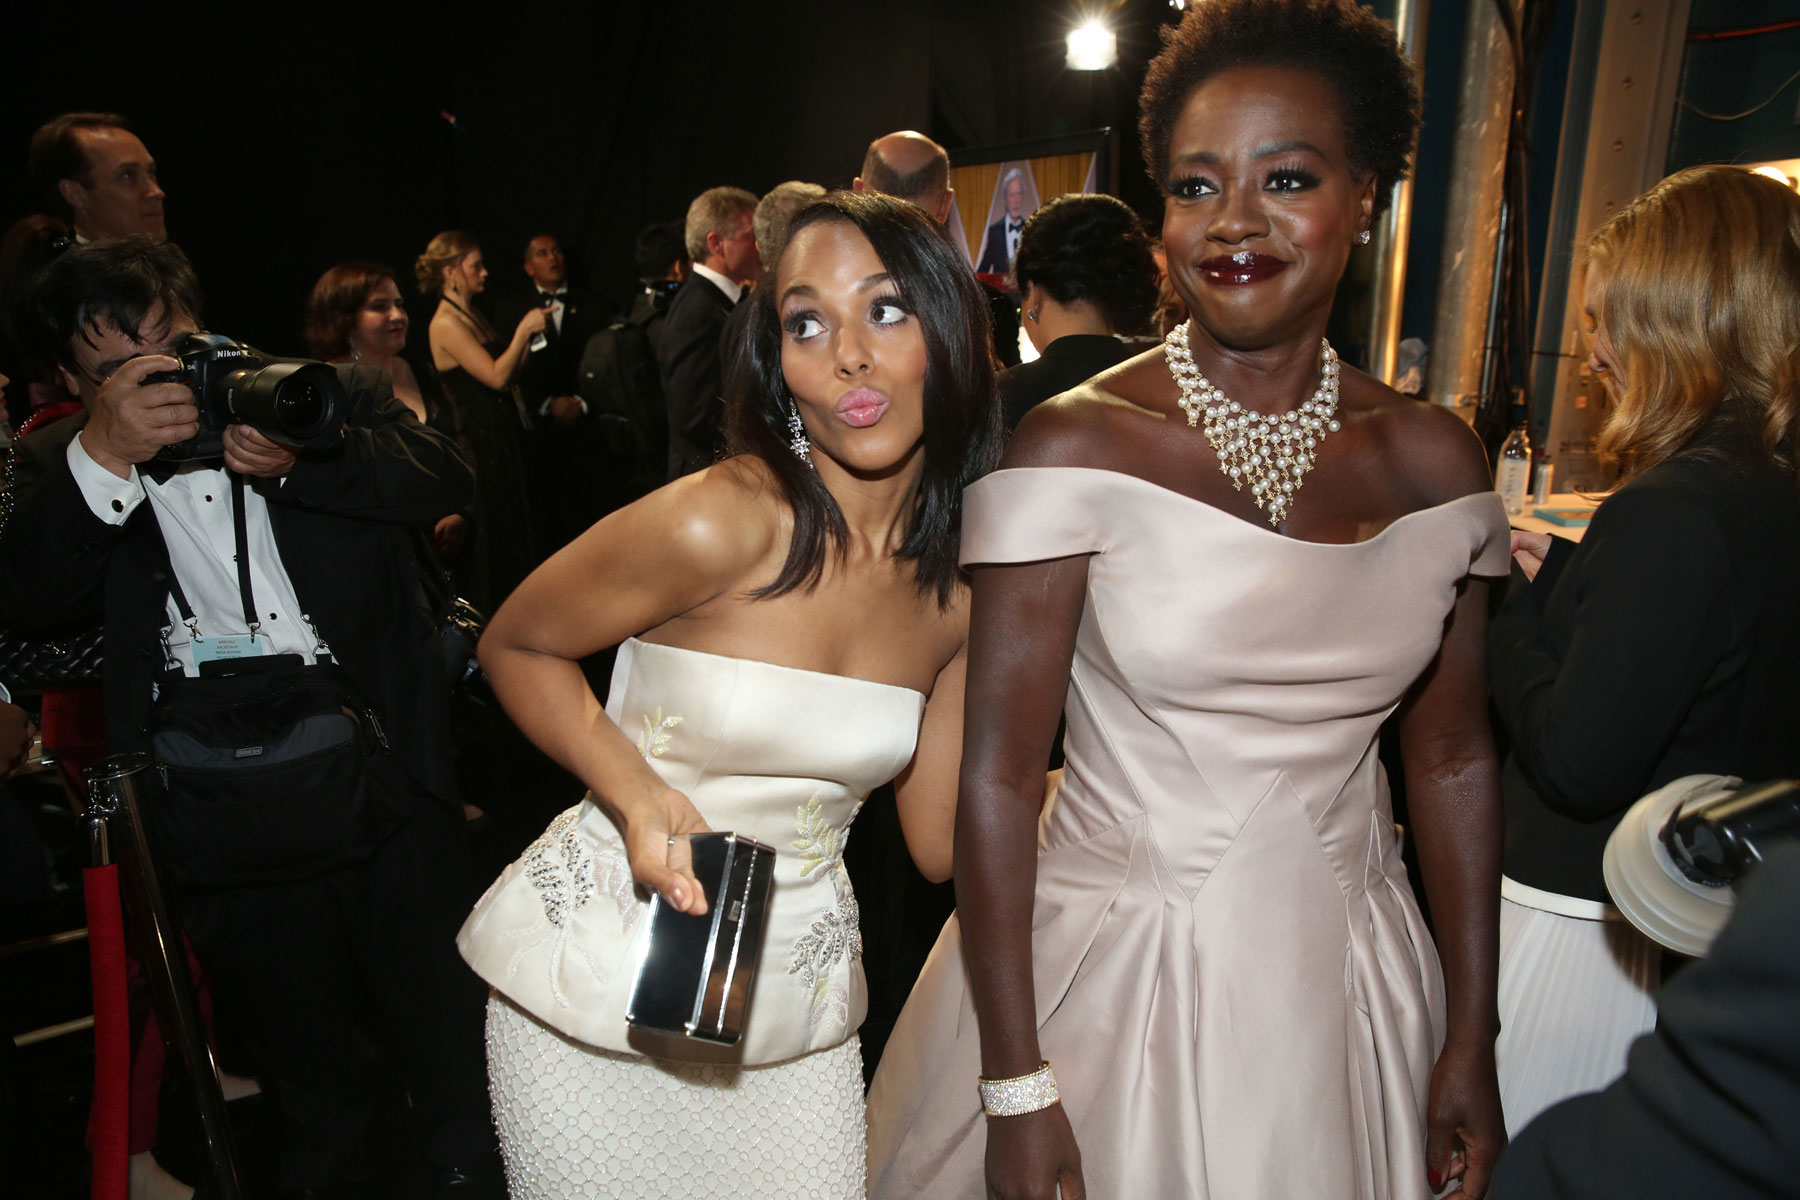 Kerry Washington, left, and Viola Davis are seen backstage at the Oscars on Sunday, Feb. 22, 2015, at the Dolby Theatre in Los Angeles. (Photo by Matt Sayles/Invision/AP)